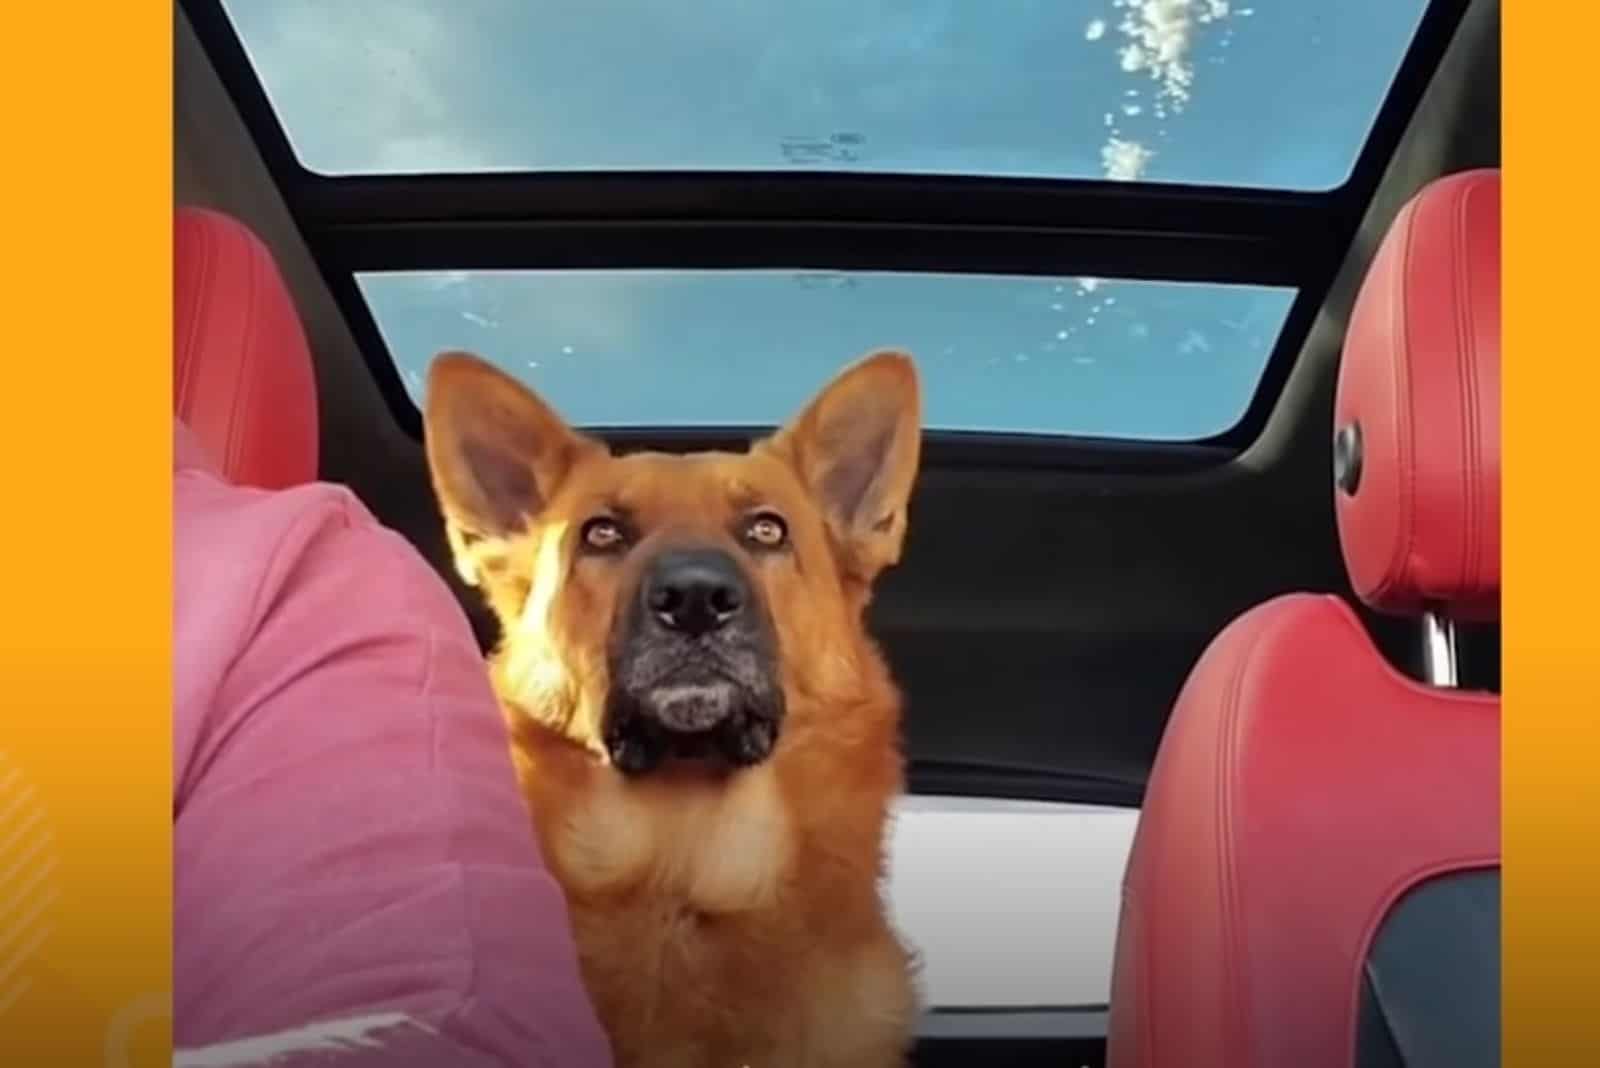 The GSD Buddy Doesn’t Speak Hooman, But Understands Everything